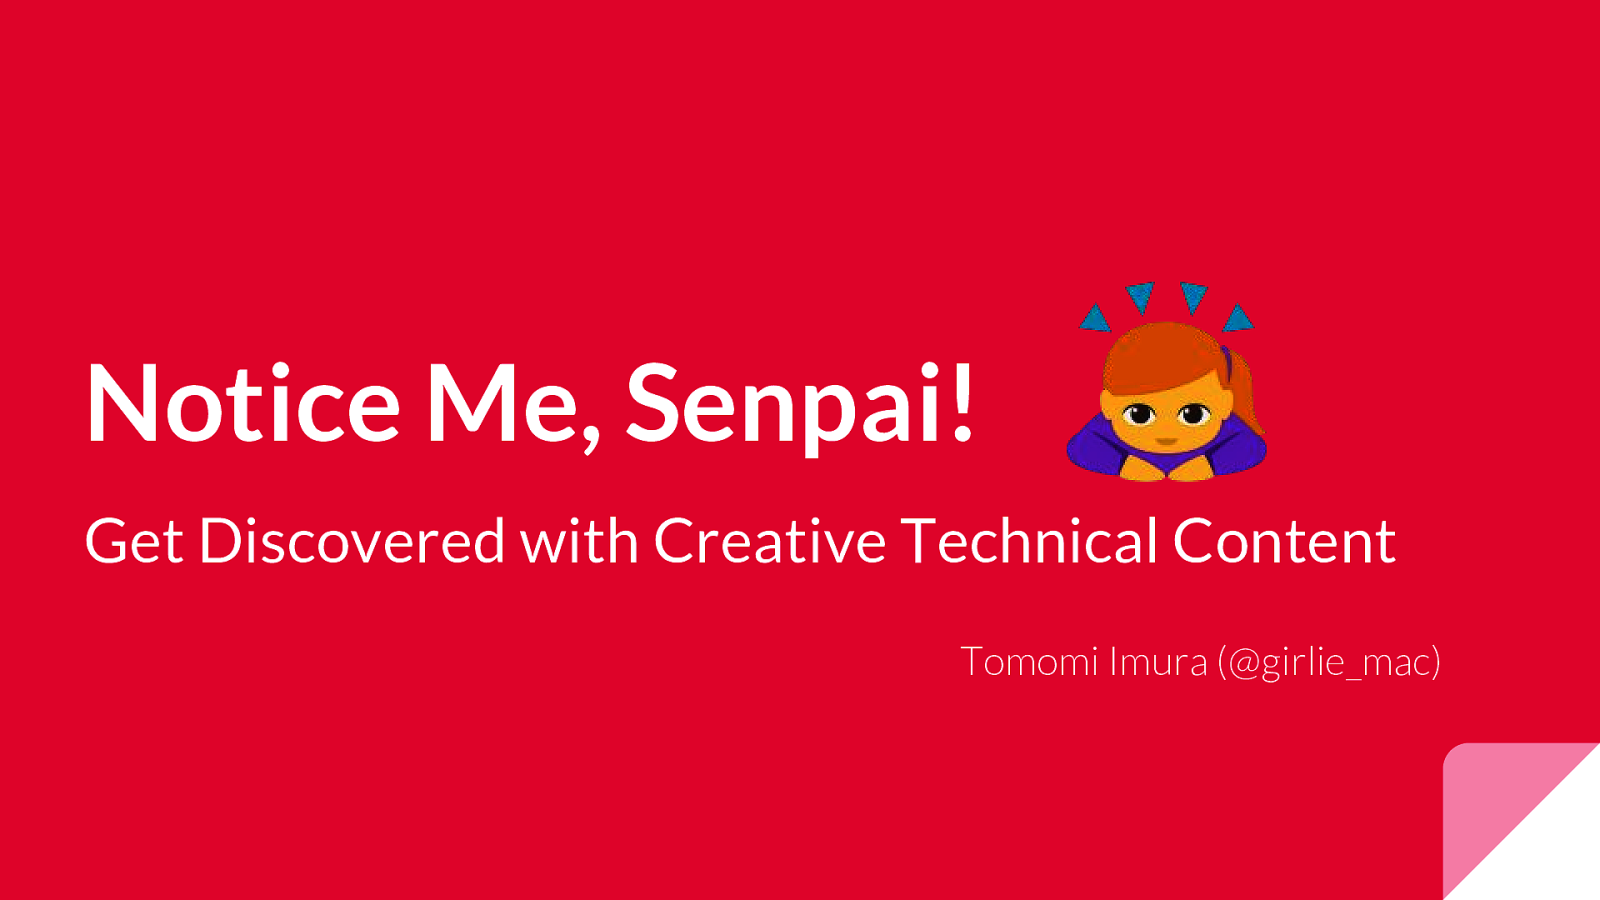 “Notice me Senpai!” - Get Discovered with Creative Technical Content